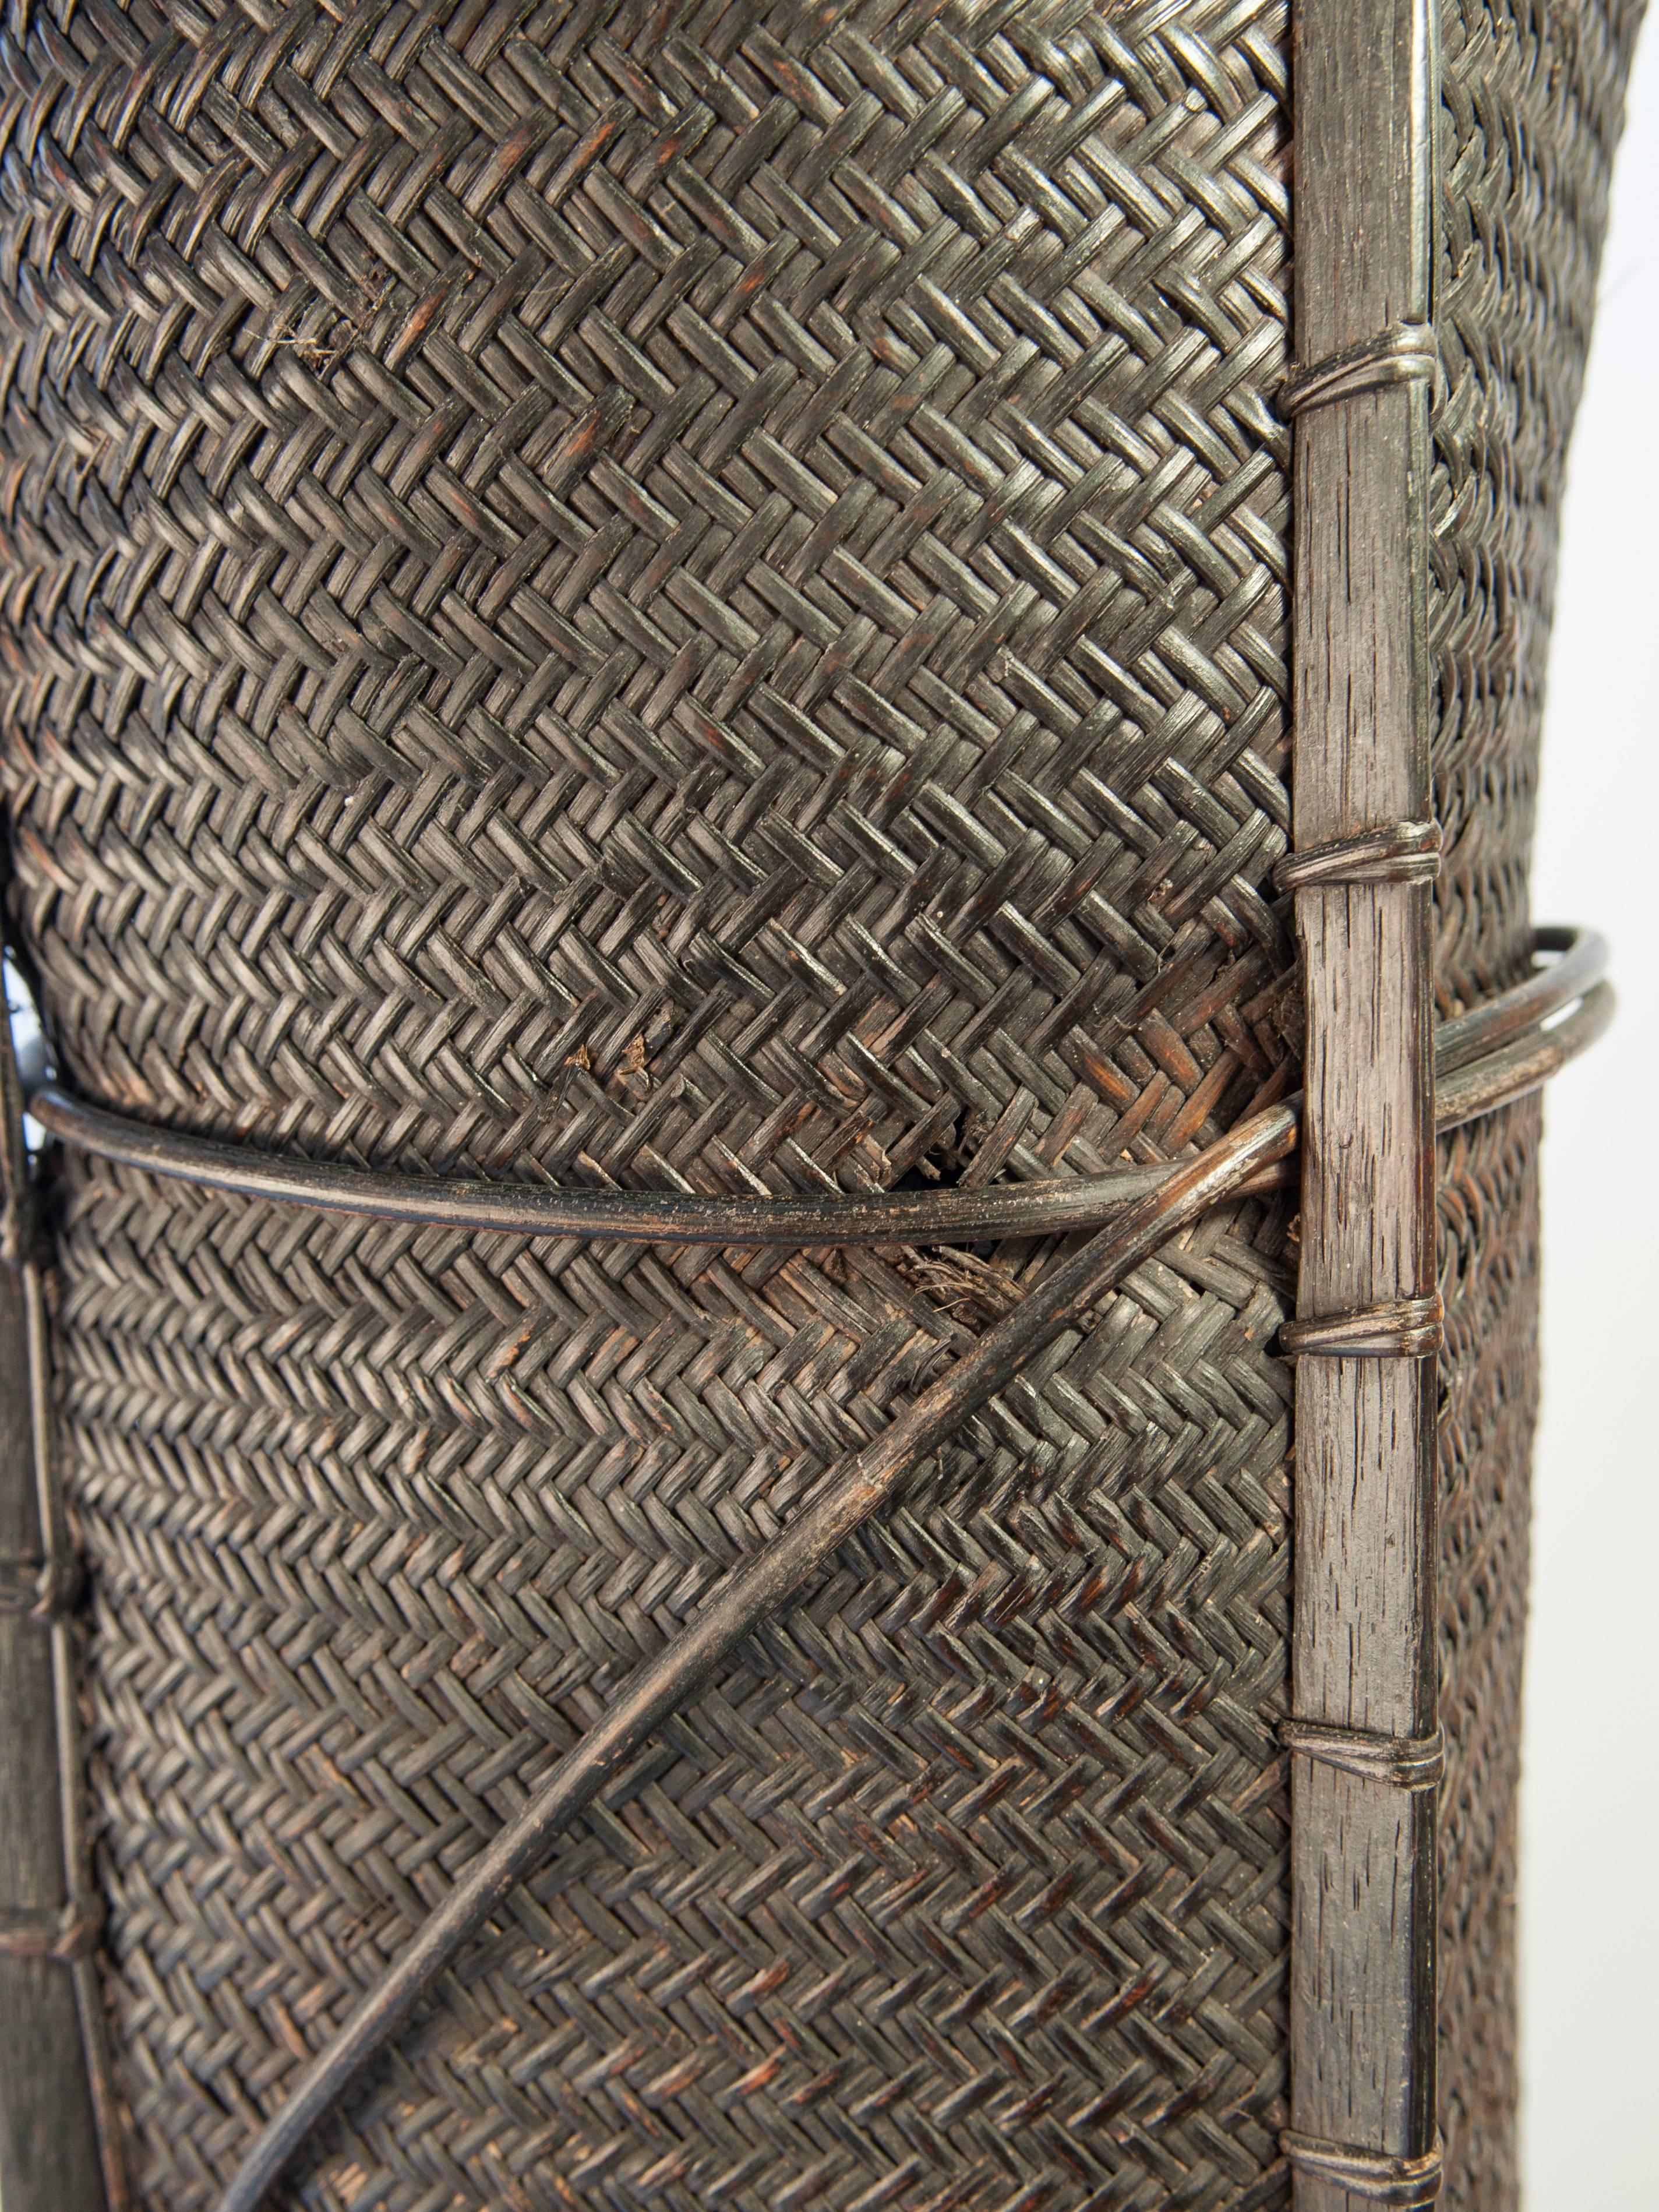 Hand-Crafted Tall Tribal Grain Storage Basket from Borneo, Mid-Late 20th Century